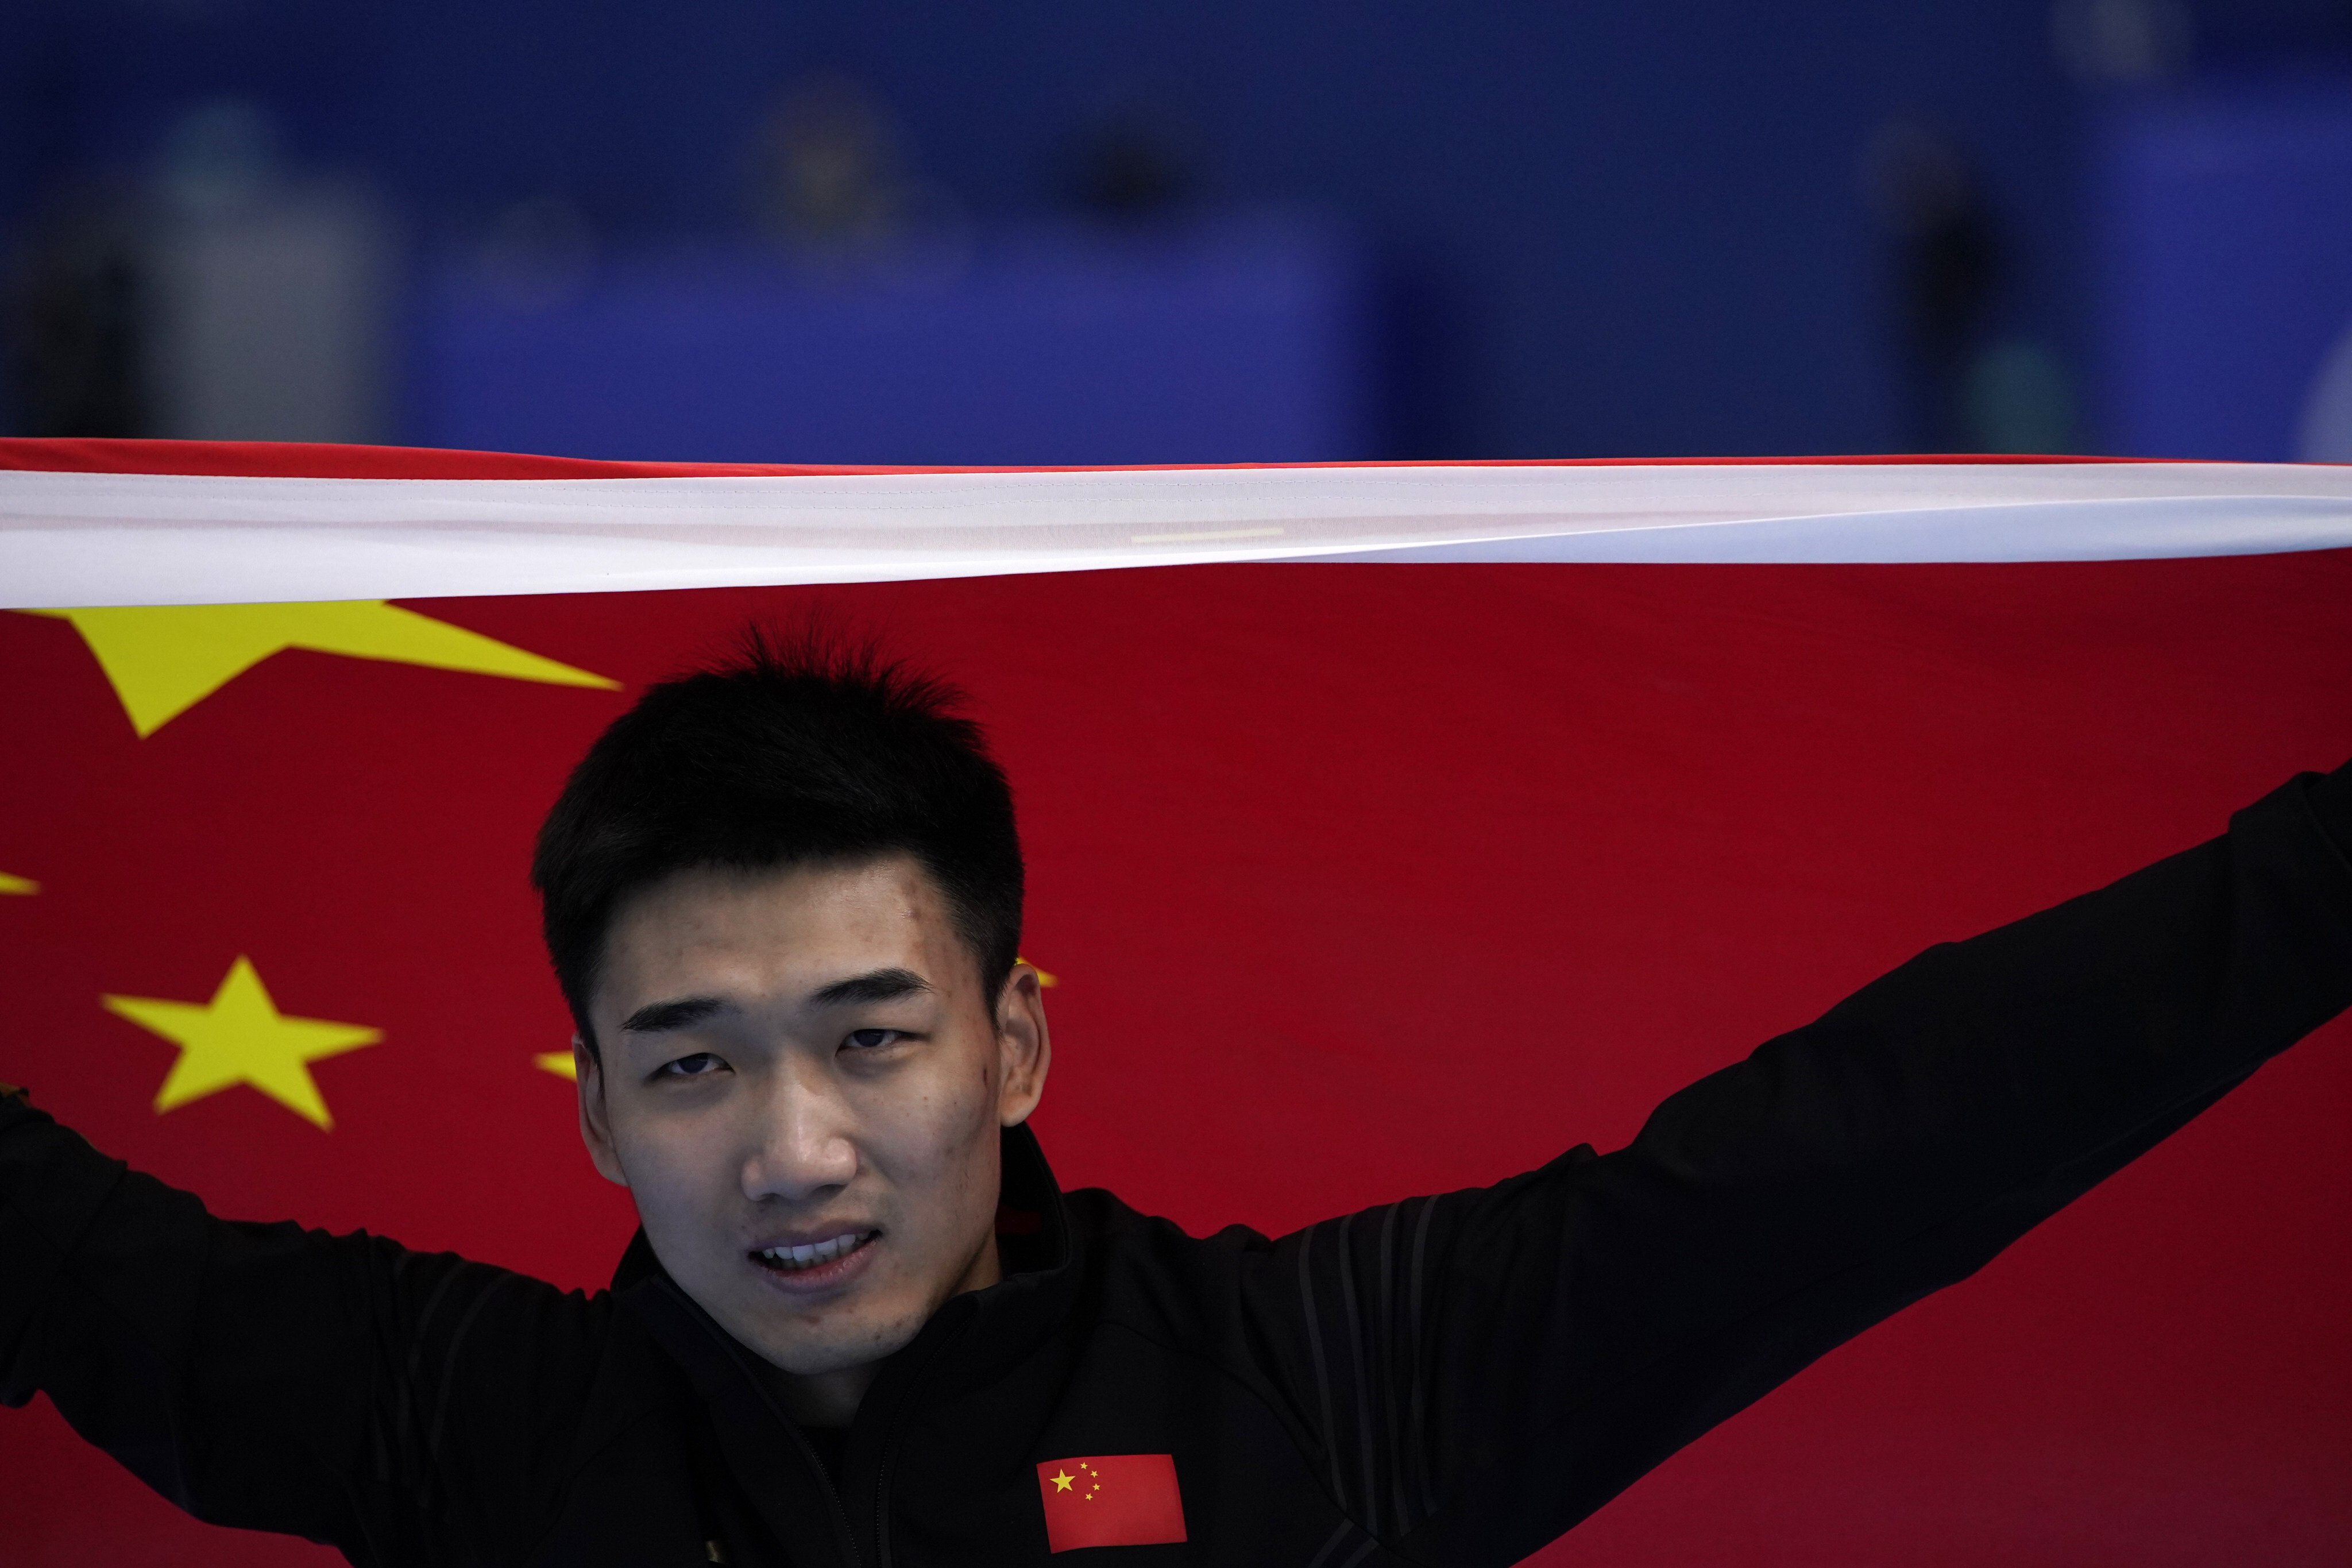 China’s Gao Tingyu carries his country’s flag after winning gold in the men’s speedskating 500m race at the 2022 Winter Olympics. Photo: AP